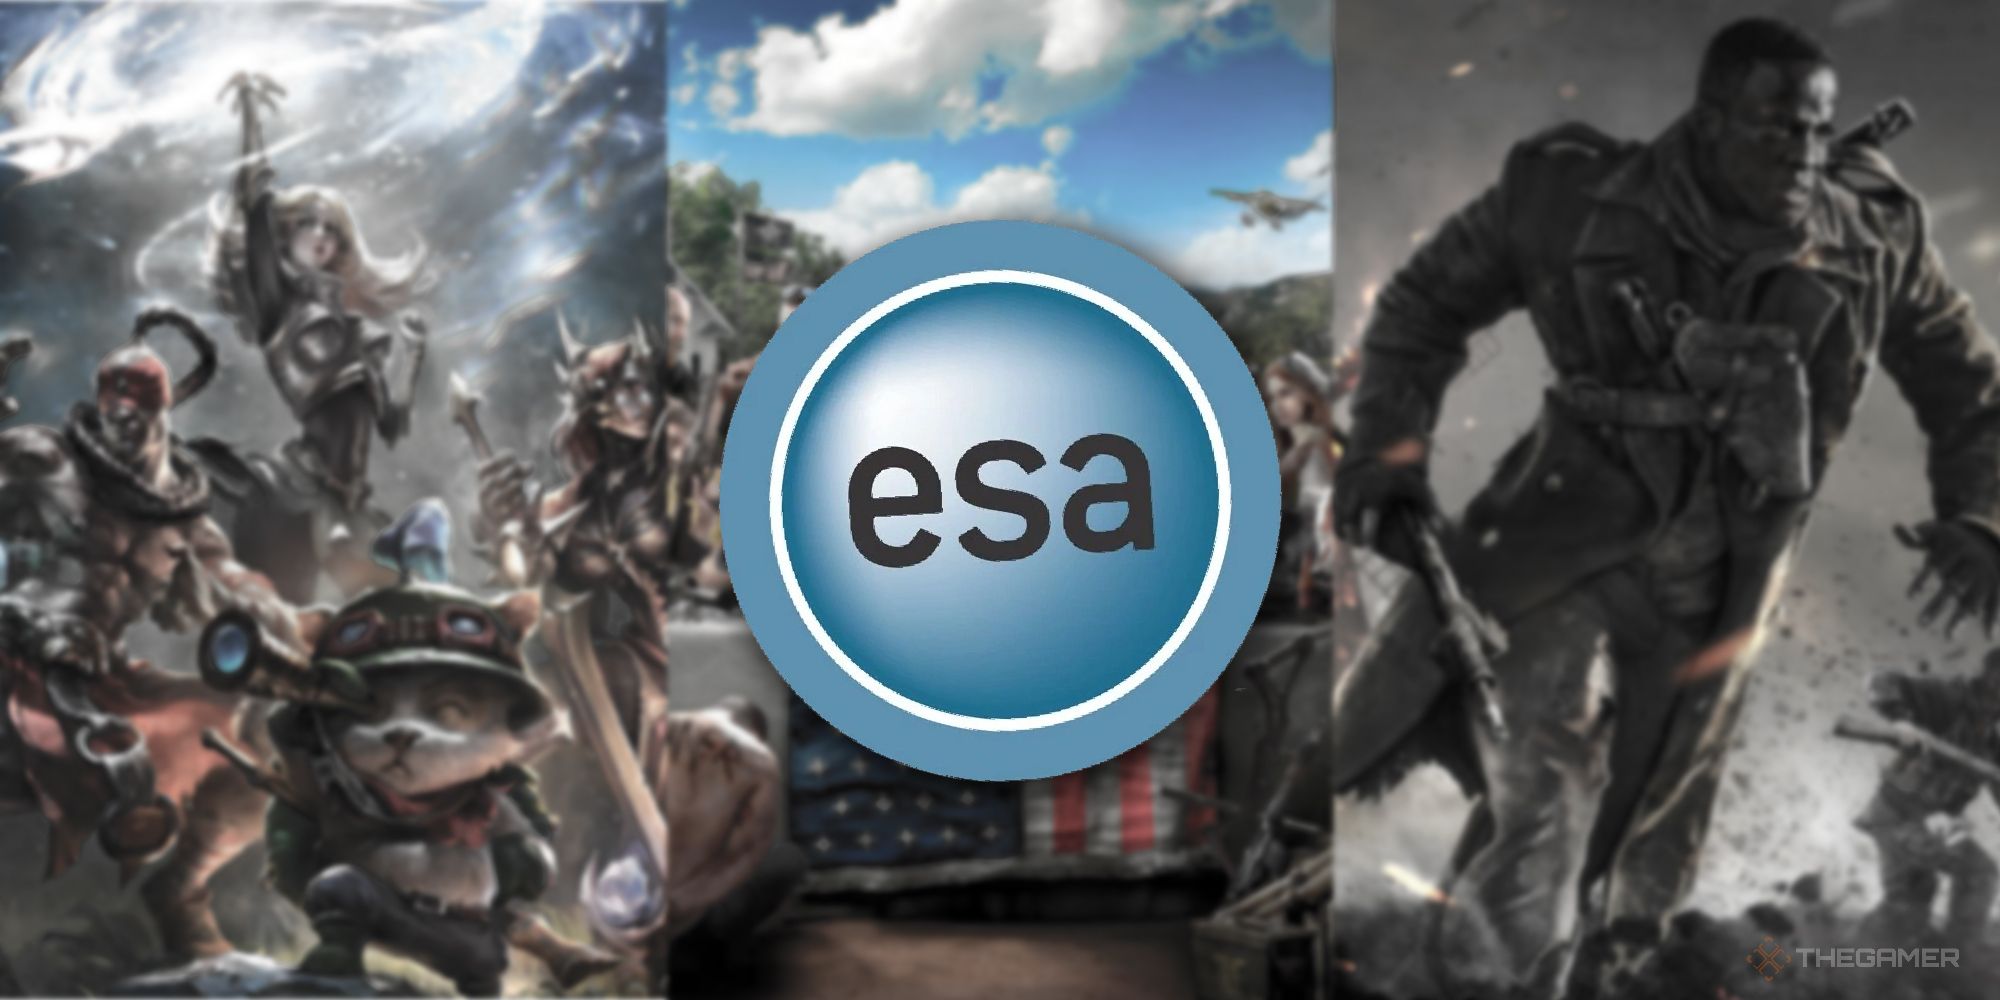 the ESA logo with a split image of call of duty vanguard, far cry 5, and another game I don't know - looks to have some sort of fighting cute animals